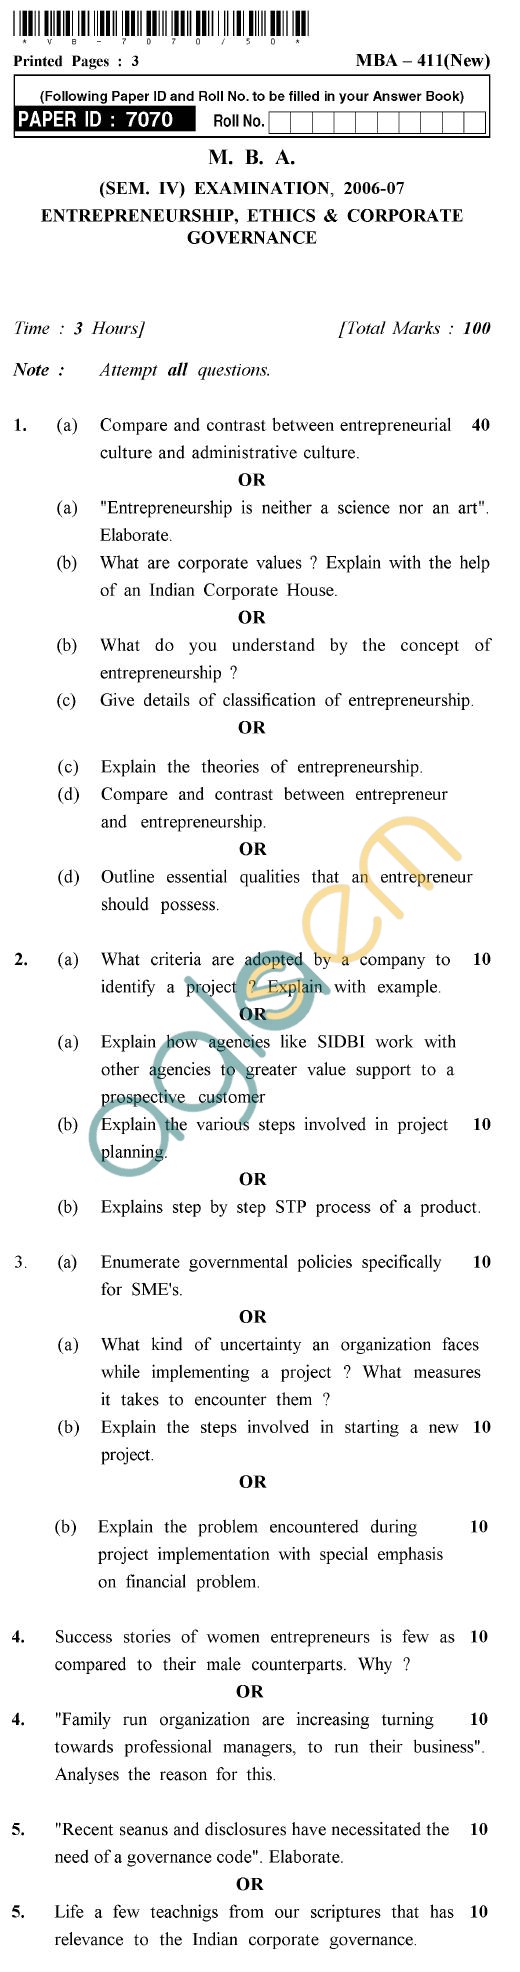 UPTU M.B.A. Question Papers - MBA-411 (New)-Entrepreneurship, Ethics & Corporate Governance